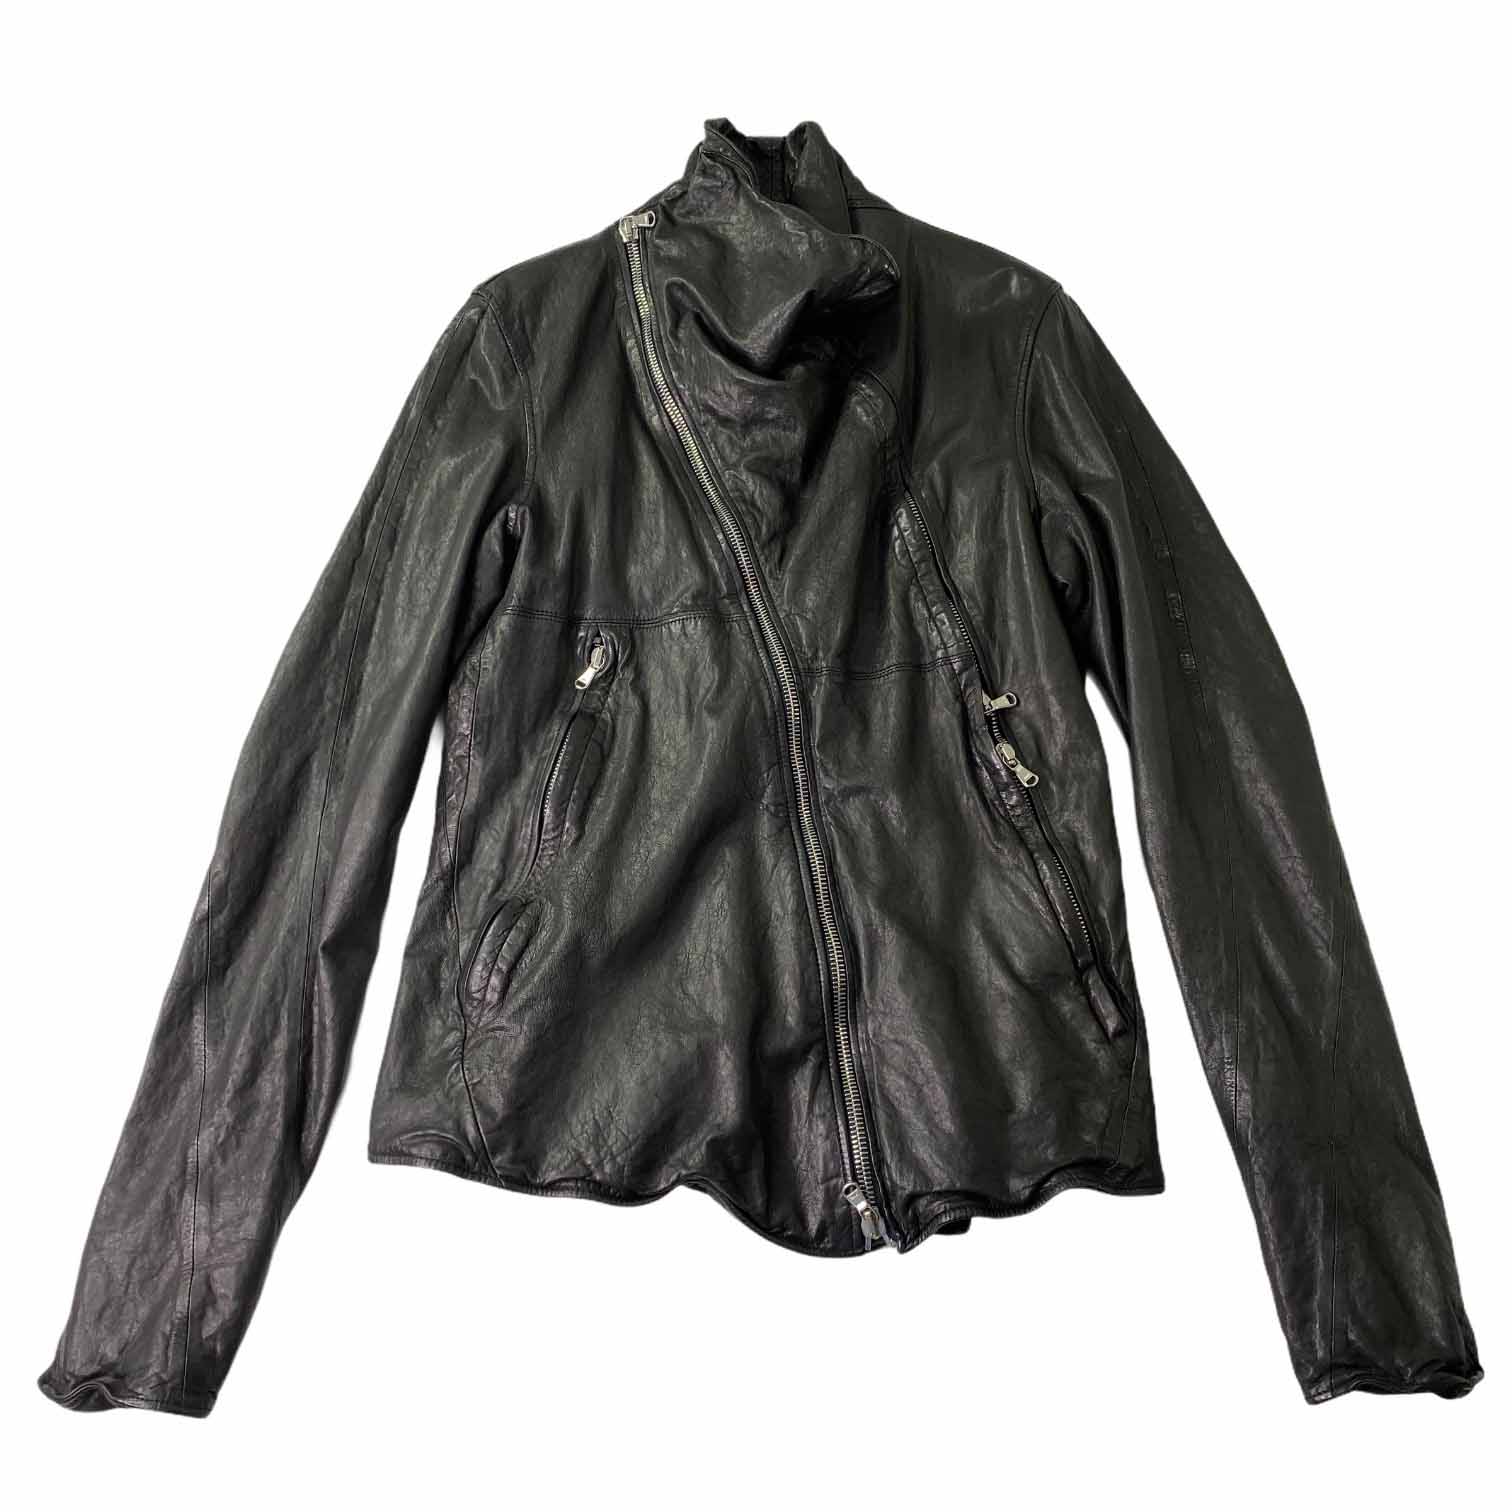 [Chaos From Undermind] High Neck Leather Jacket BK - Size Free